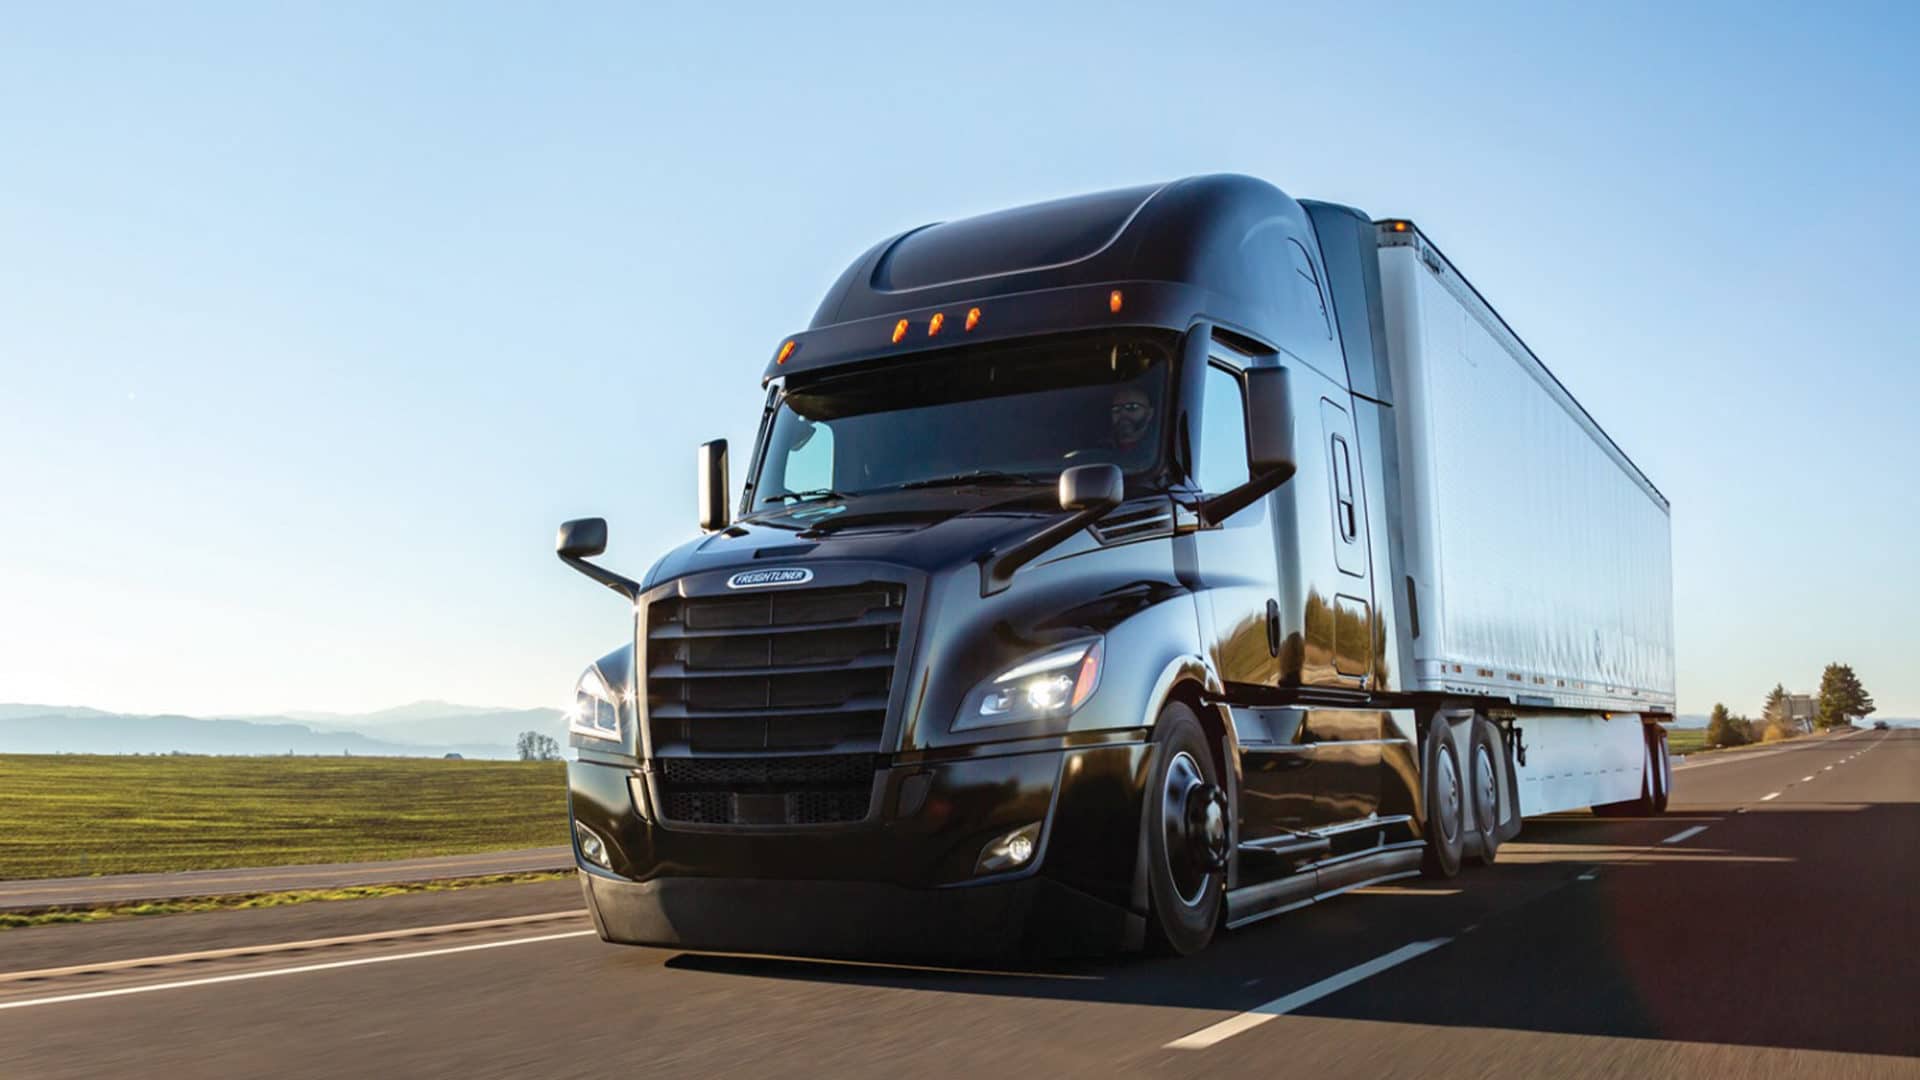 Daimler Trucks is recalling 139 vehicles due to a loose caliiper-mounting bolt